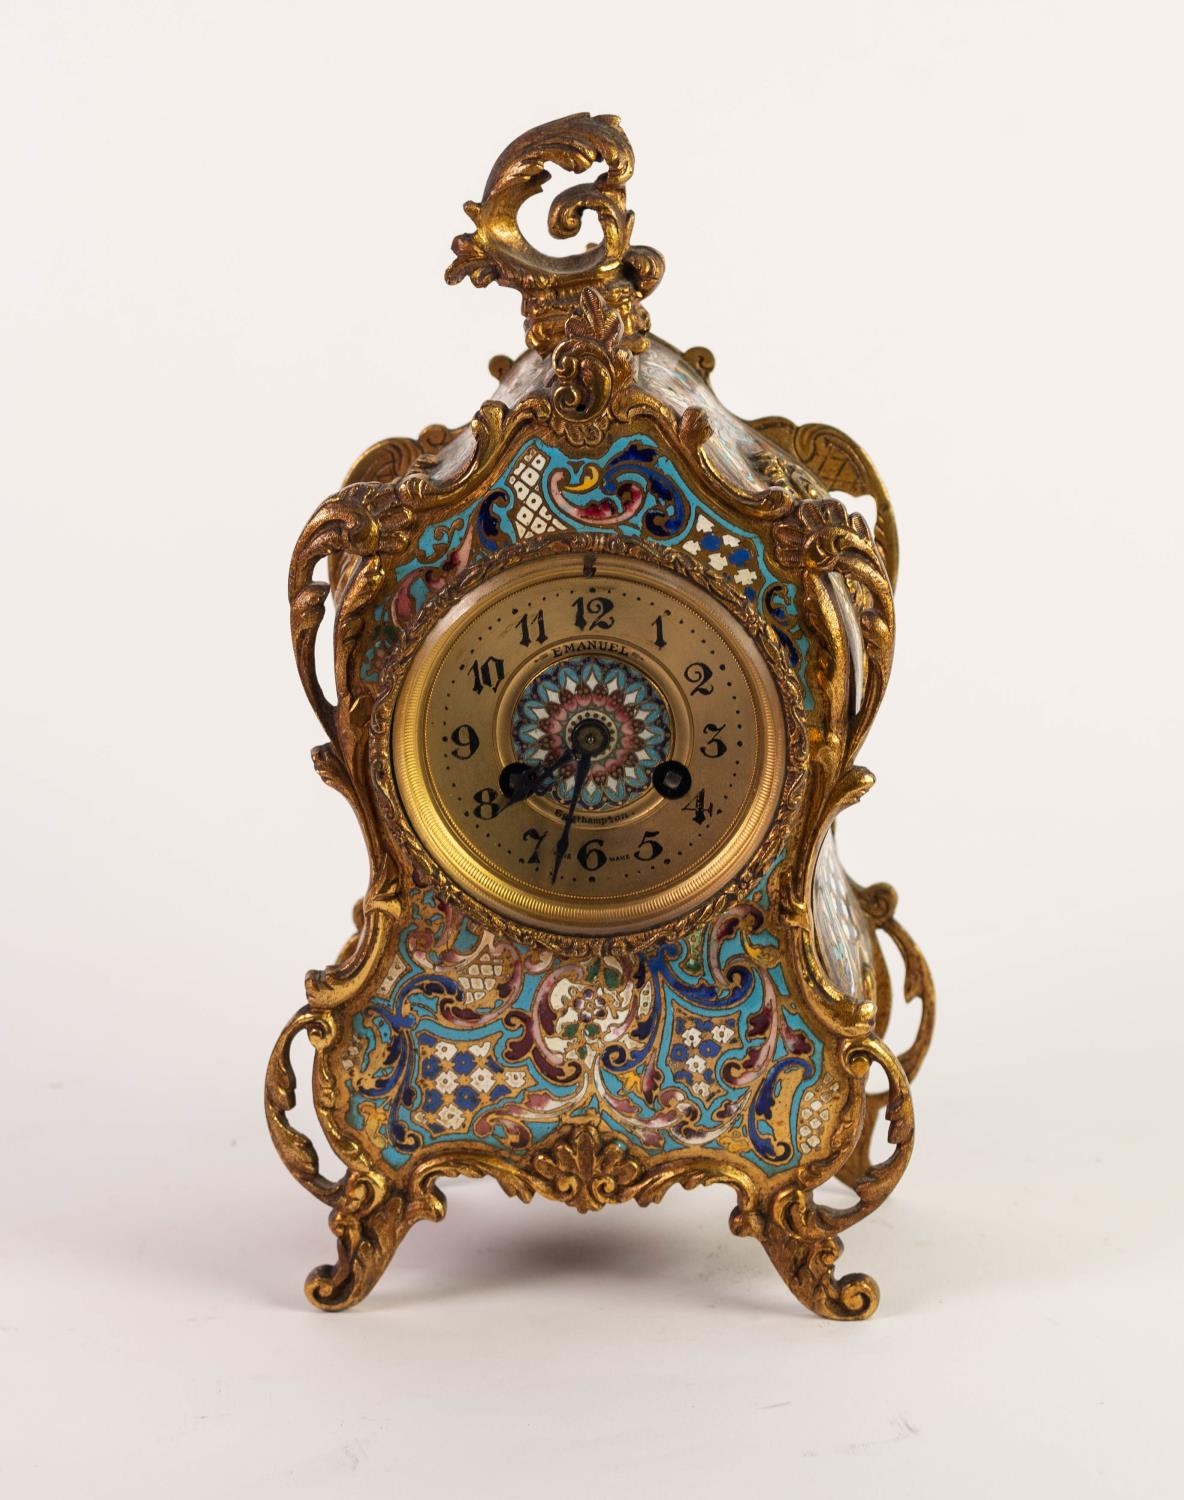 CIRCA 1900 FRENCH GILT METAL AND CHAMPLEVE ENAMEL ROCOCO REVIVAL CASED MANTEL CLOCK, the movement by - Image 4 of 8